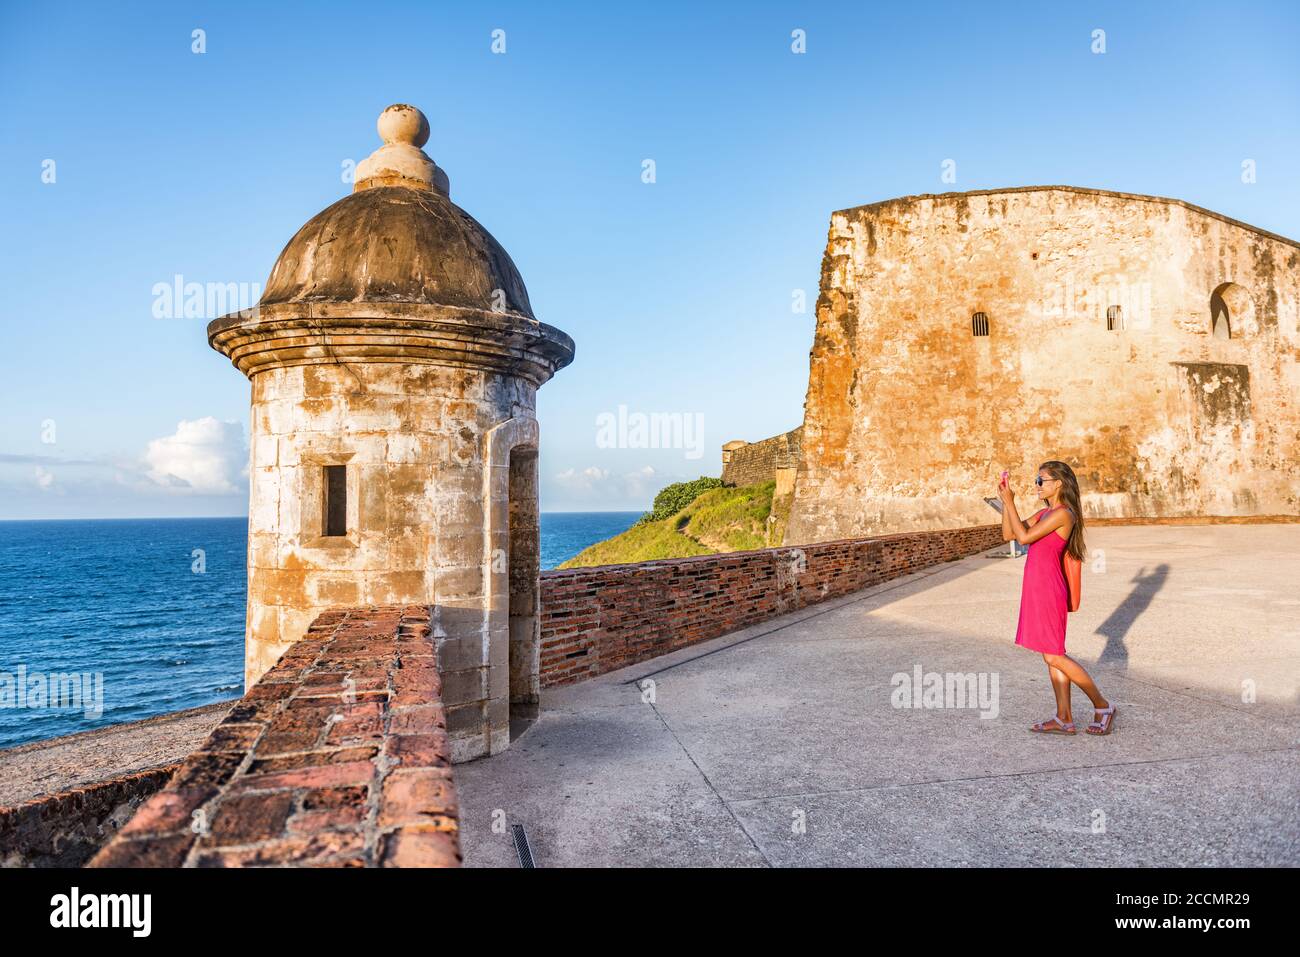 Old San Juan city tourist taking photo in Puerto Rico. Woman using phone taking pictures of ruins of watch tower of San Cristobal Castillo Fort, with Stock Photo